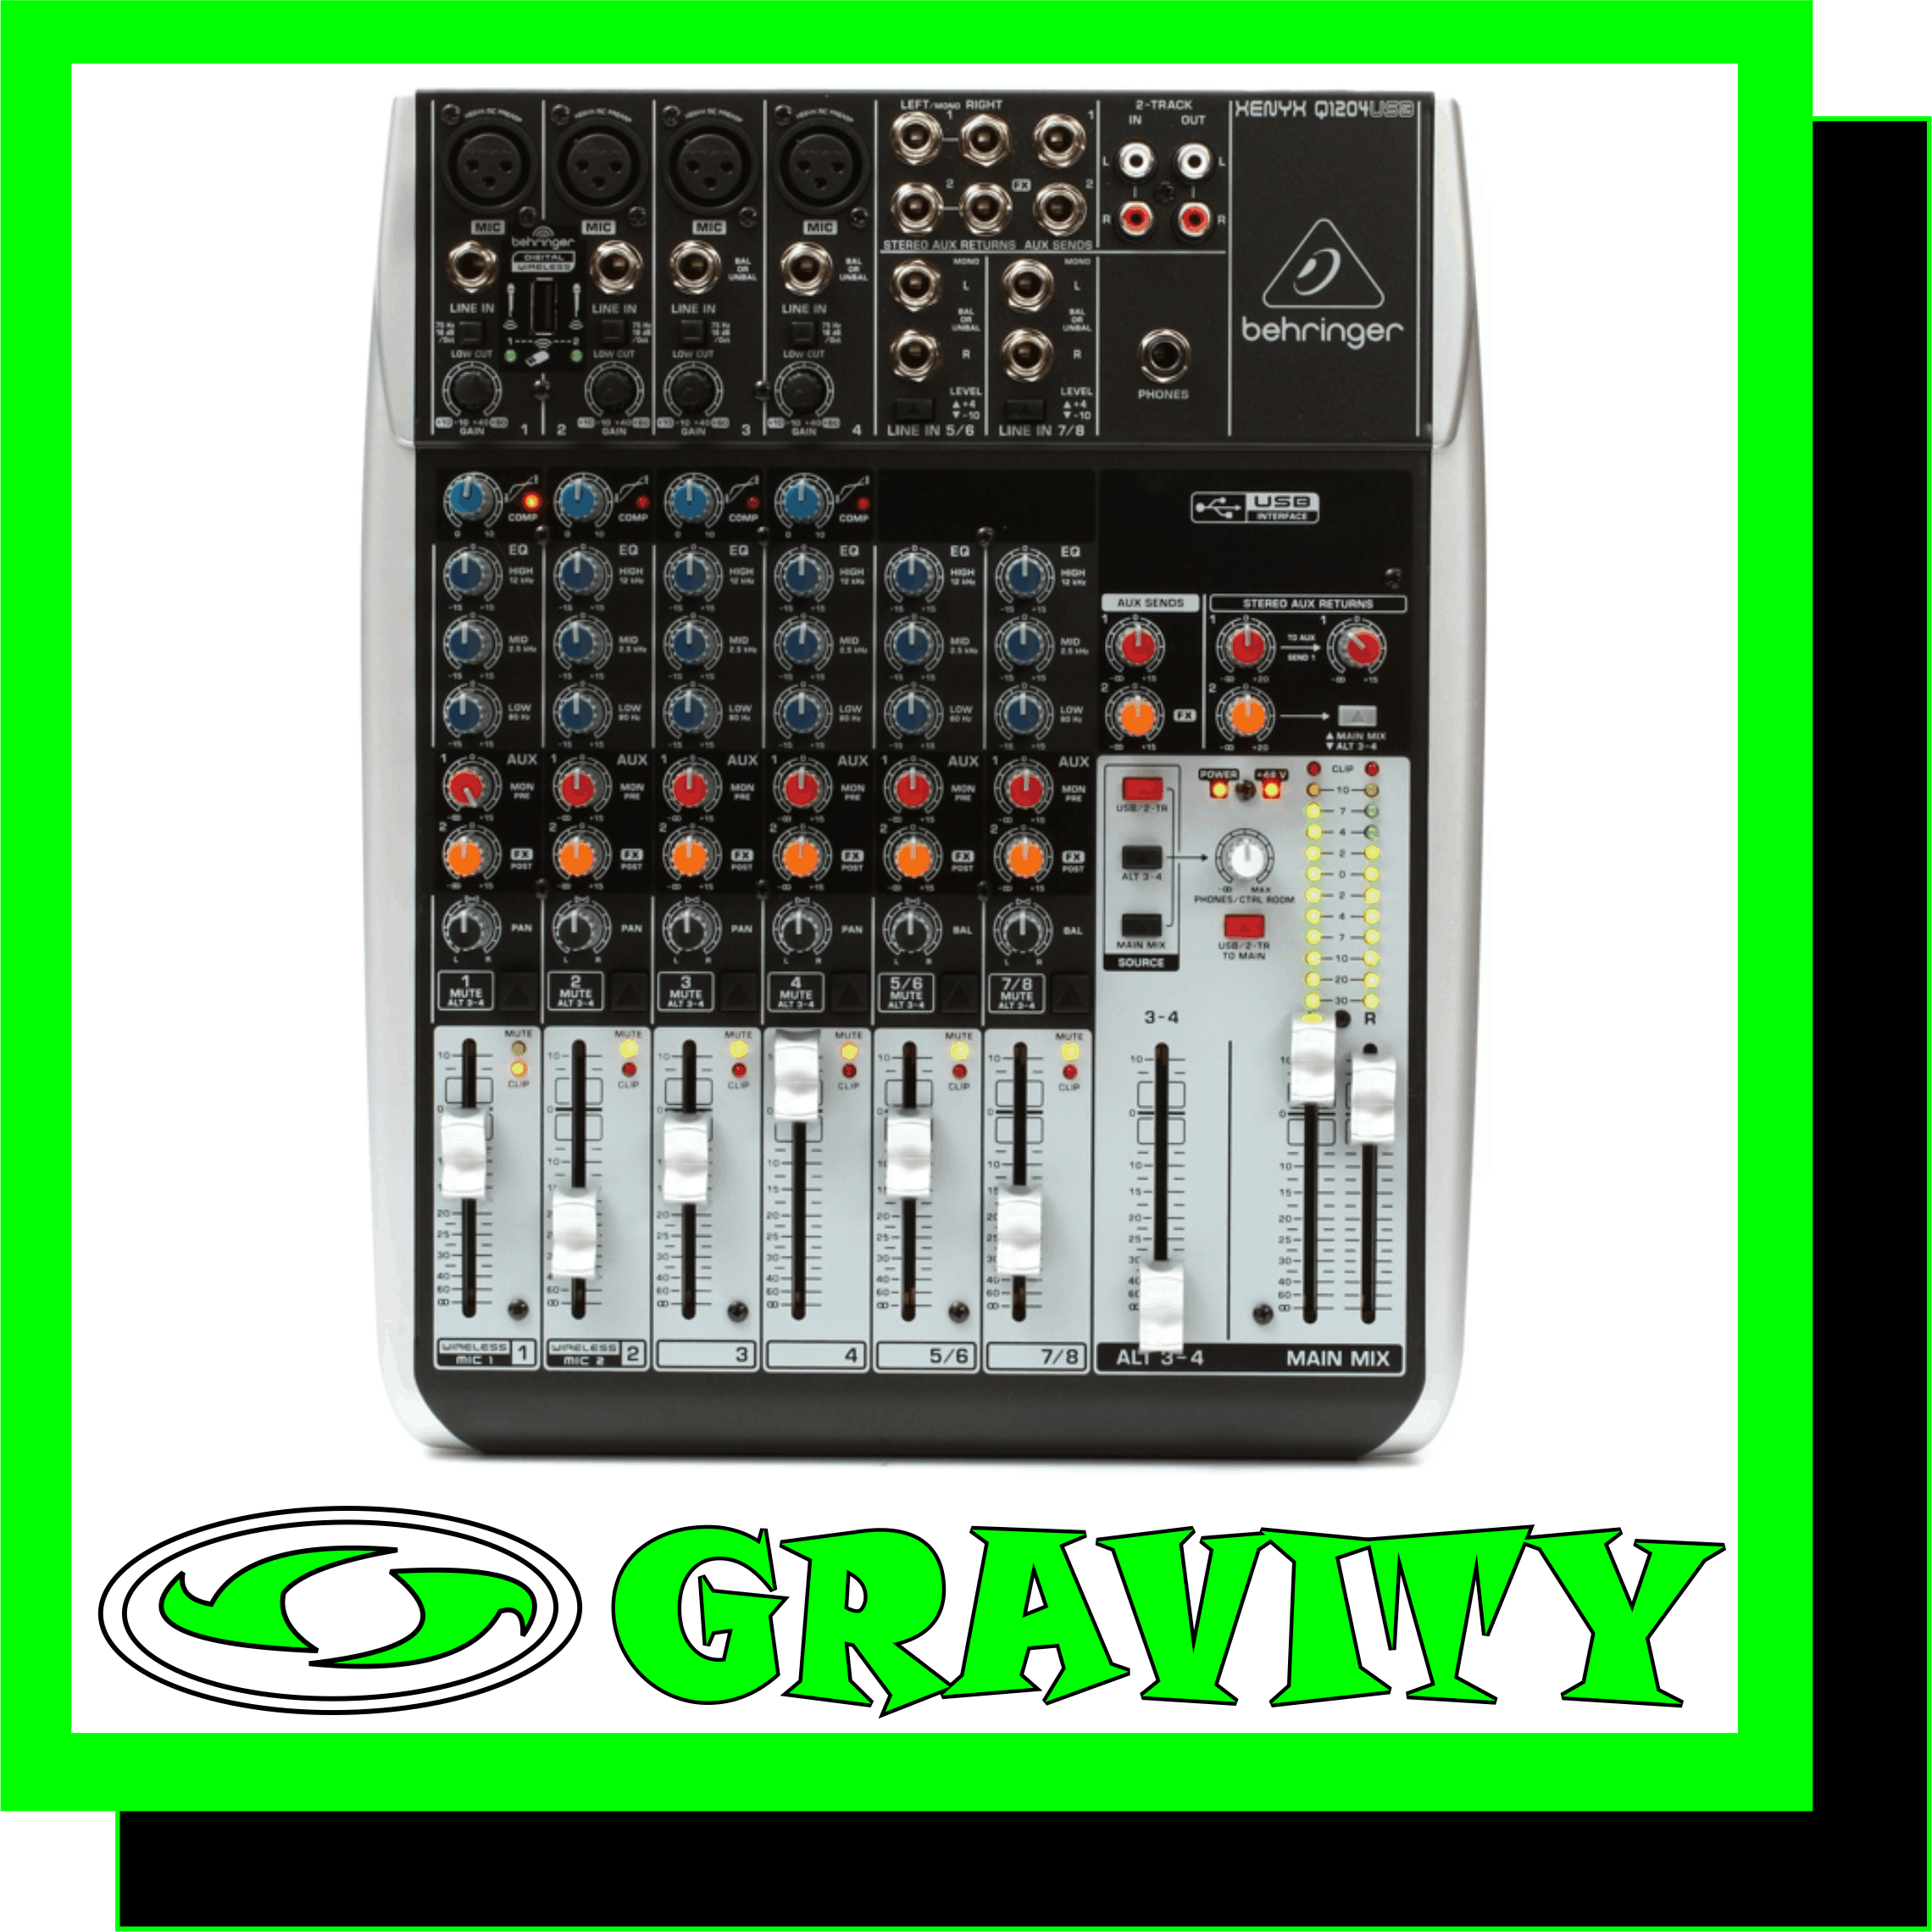 XENYX Q1204USB Premium 12-Input 2/2-Bus Mixer with XENYX Mic Preamps & Compressors, Wireless Option and USB/Audio Interface  Product Features: -Premium ultra-low noise, high headroom mixer -4 state-of-the-art, phantom-powered XENYX Mic Preamps comparable to stand-alone boutique preamps -4 studio-grade compressors with super-easy “one-knob” functionality and control LED for professional vocal and instrumental sound -“Wireless-ready” for high-quality BEHRINGER digital wireless system (not included) -Built-in stereo USB/Audio Interface to connect directly to your computer. Free audio recording, editing and podcasting software plus 150 instrument/effect plug-ins  downloadable at behringer.com -Neo-classic “British” 3-band EQs for warm and musical sound -2 aux sends per channel: 1 pre fader for monitoring applications, 1 post fader for external FX devices -Clip LEDs and mute/alt 3-4 function on all channels -2 subgroups with separate outputs for added routing flexibility -2 multi-functional stereo aux returns with flexible routing -Balanced main mix outputs with gold-plated XLR connectors plus separate control room, headphones and 2-track outputs -Control room/phones outputs with multi-input source matrix -Long-wearing 60-mm logarithmic-taper faders and sealed rotary controls -“Planet Earth” switching power supply for maximum flexibility (100 – 240 V~), noise-free audio, superior transient response plus low power consumption for energy saving -High-quality components and exceptionally rugged construction ensure long life -Conceived and designed by BEHRINGER Germany